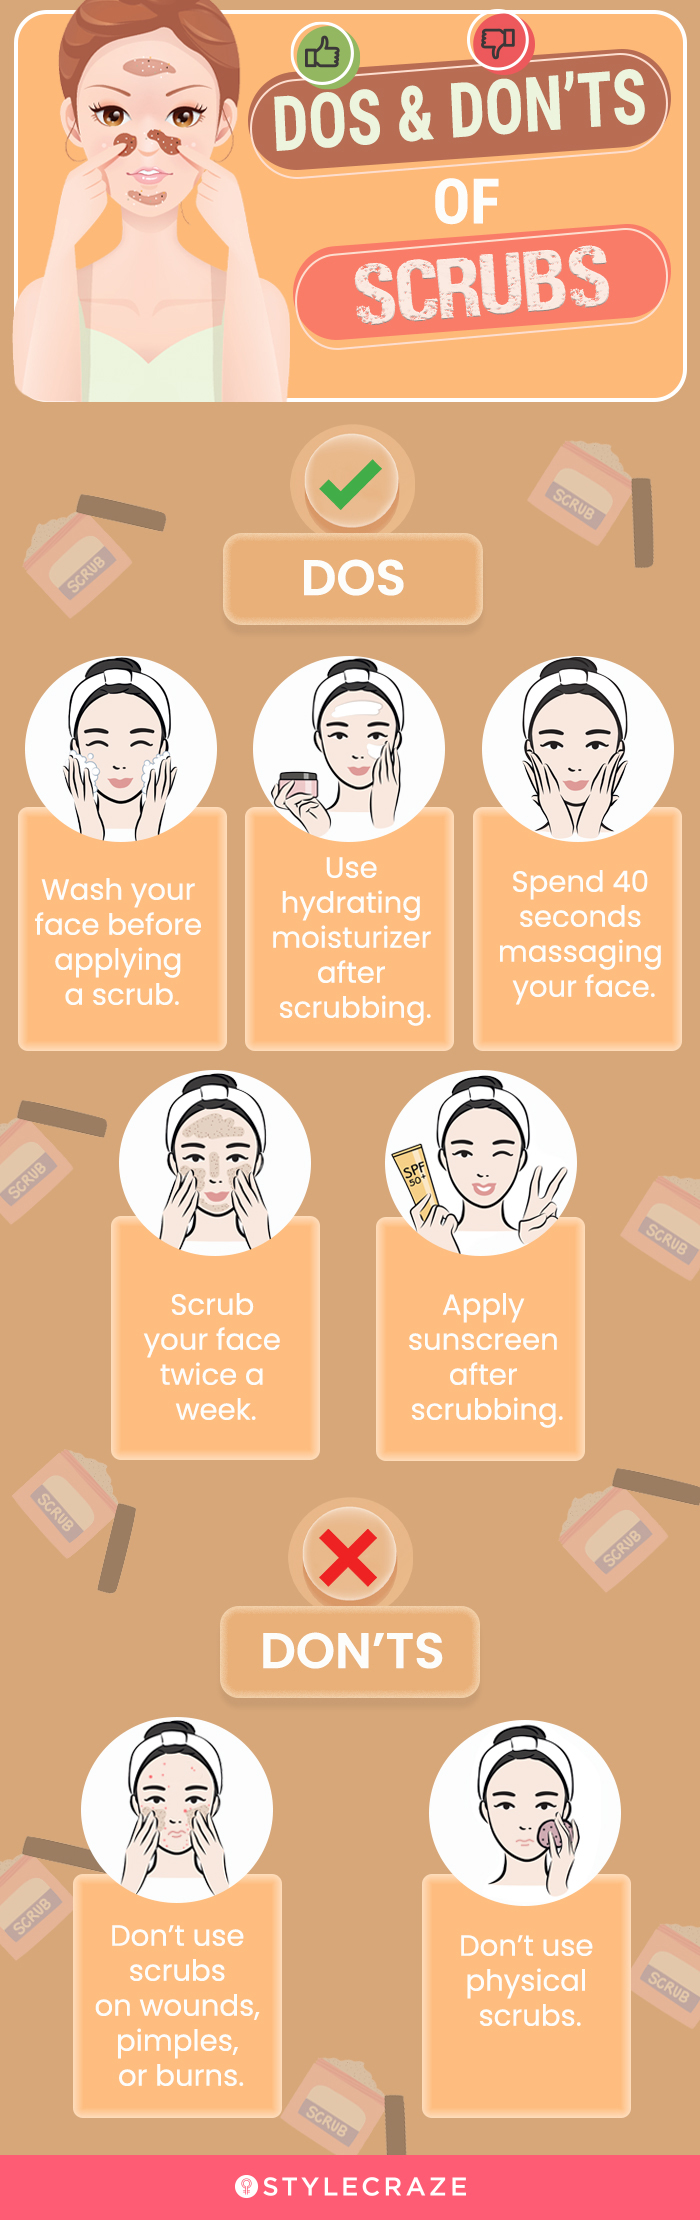 dos & don'ts of scrubs [infographic]